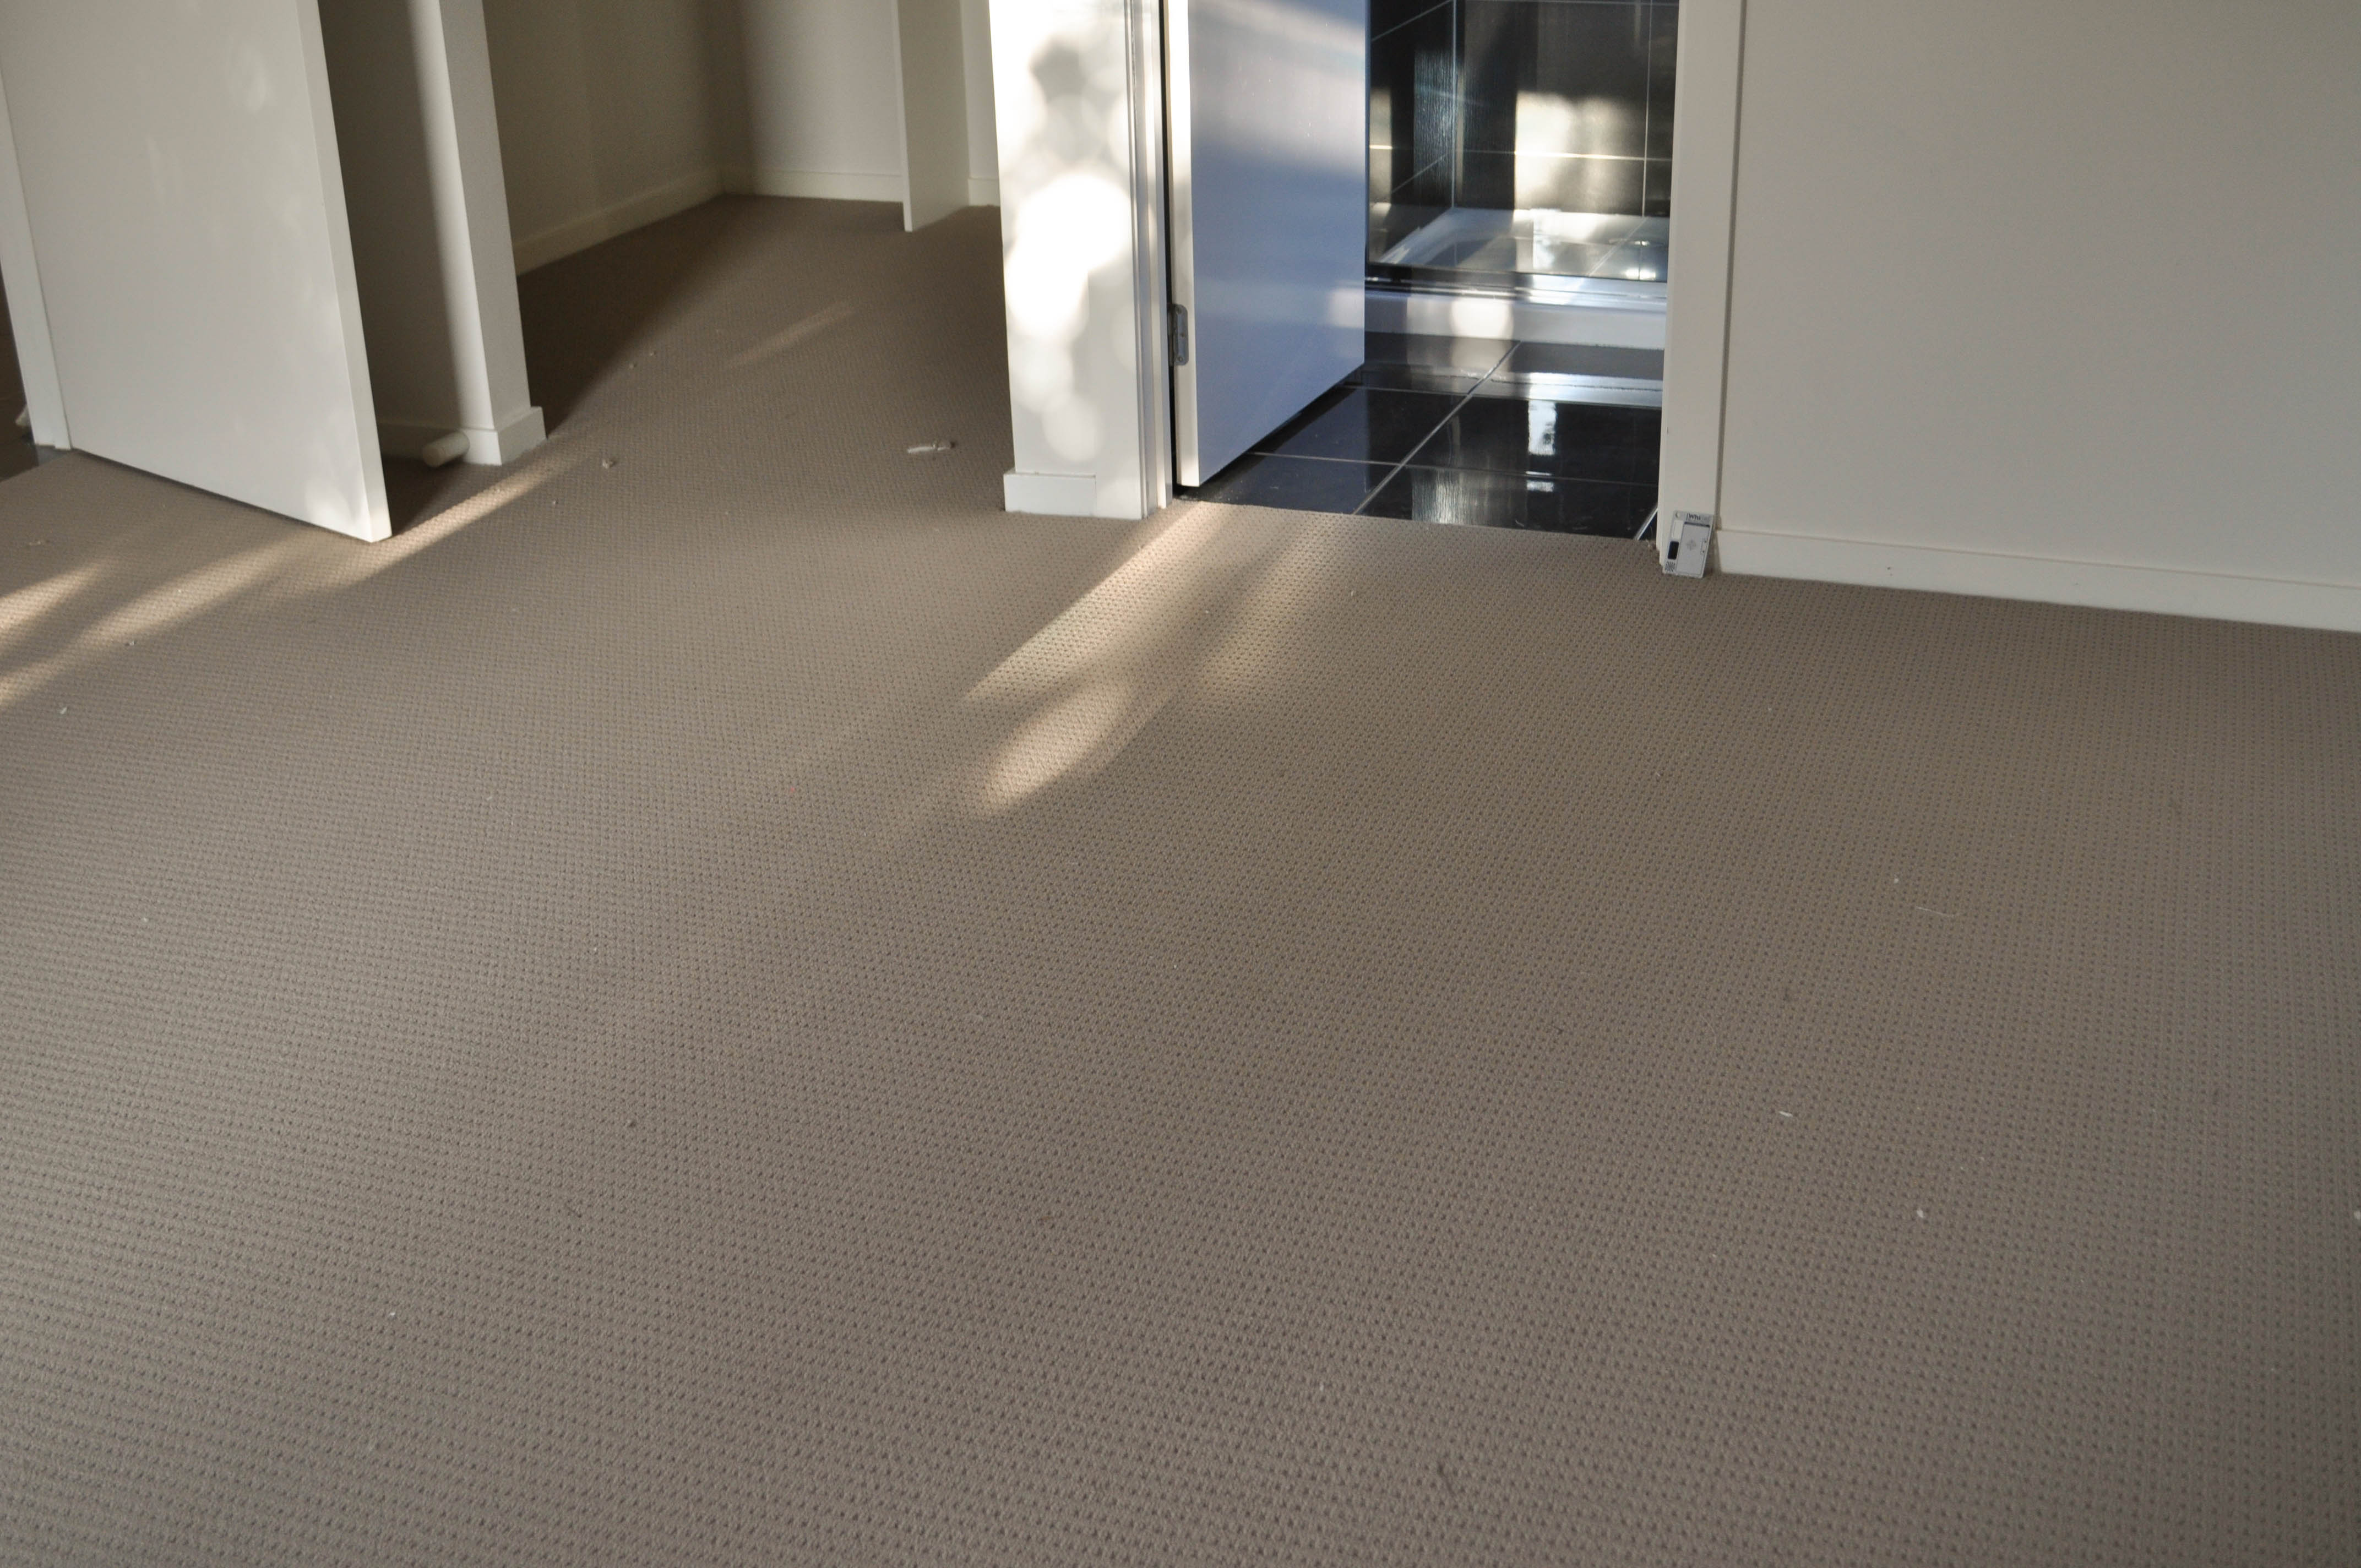 showing a room with it's floor carpeted by a cream colored, modulated nylon yarn loop pile, carpet.